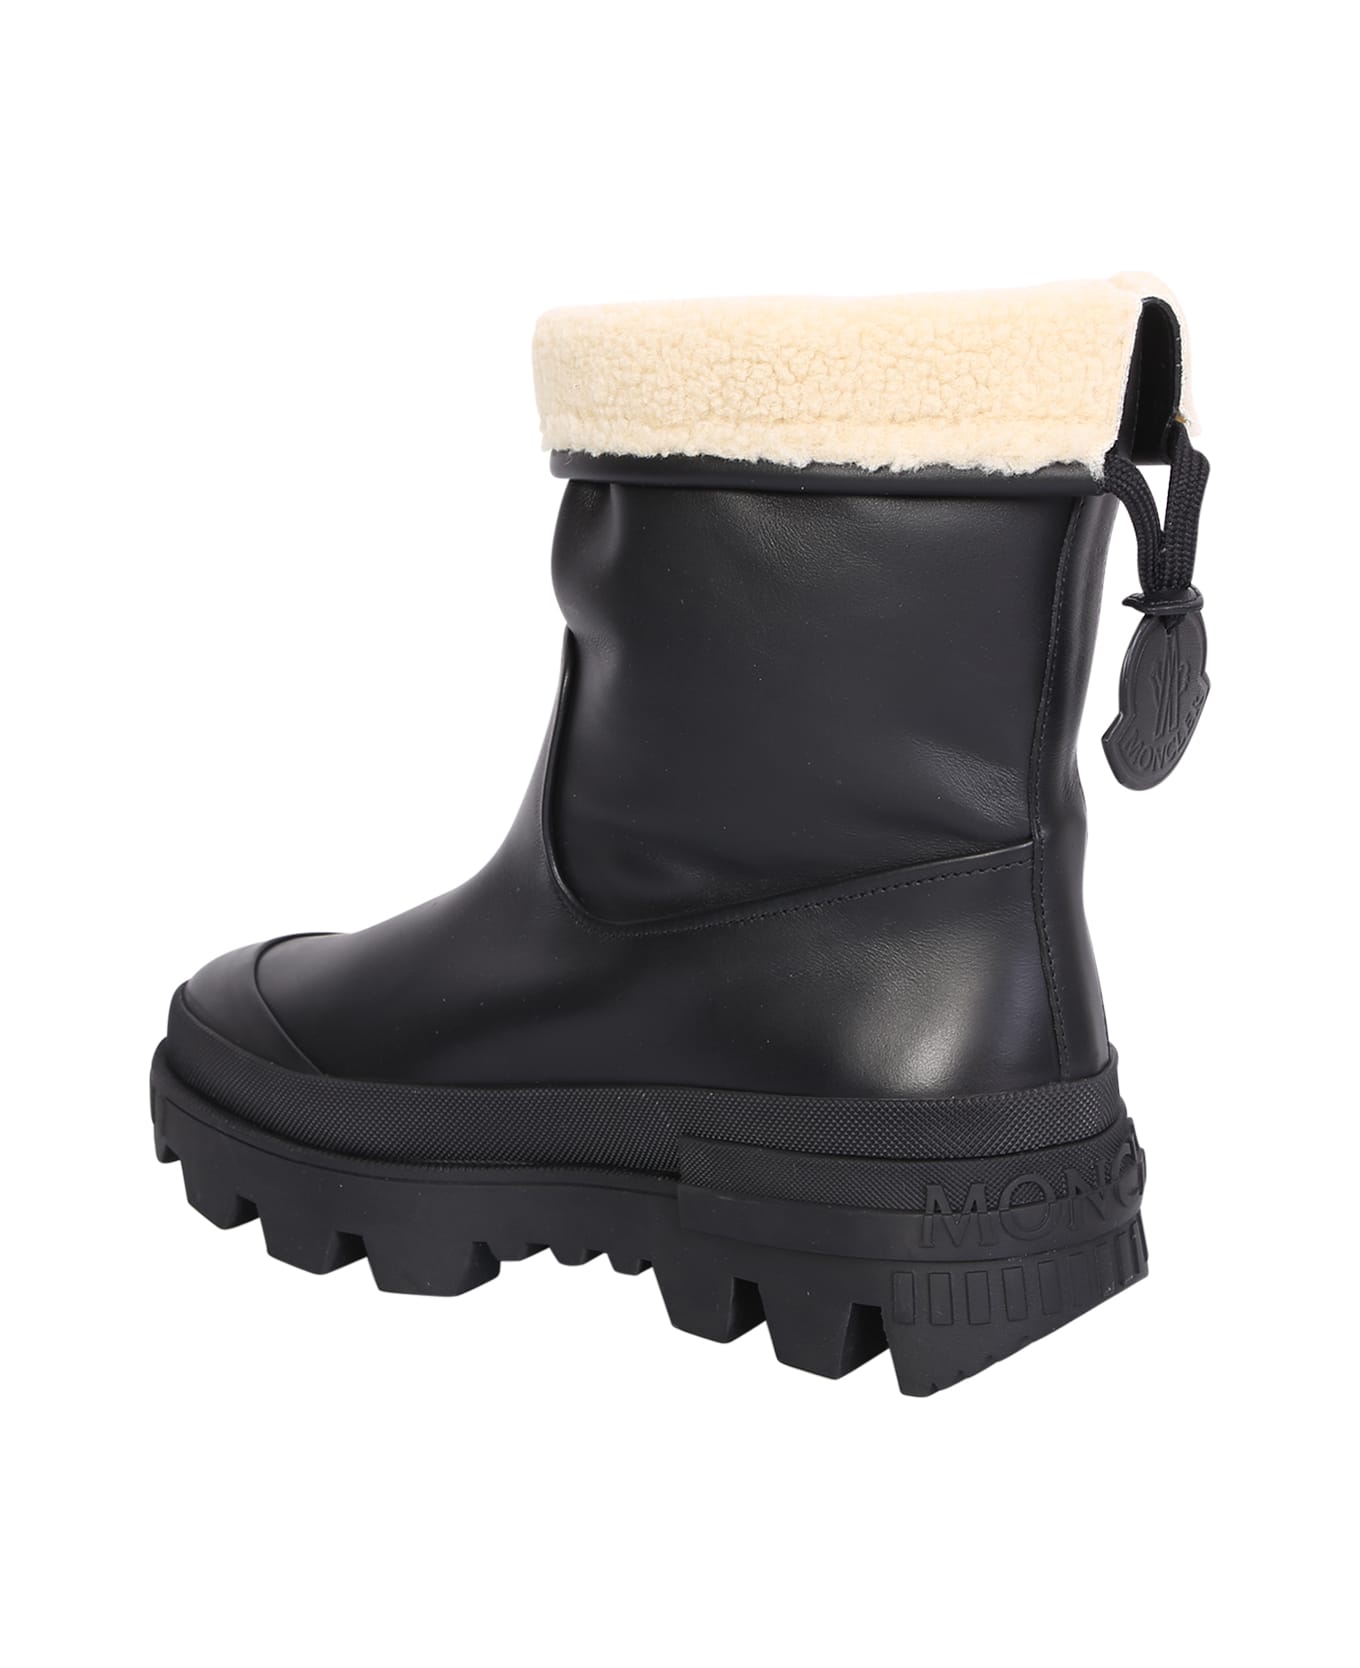 Moncler Moscova Ankle Boots - Black ブーツ